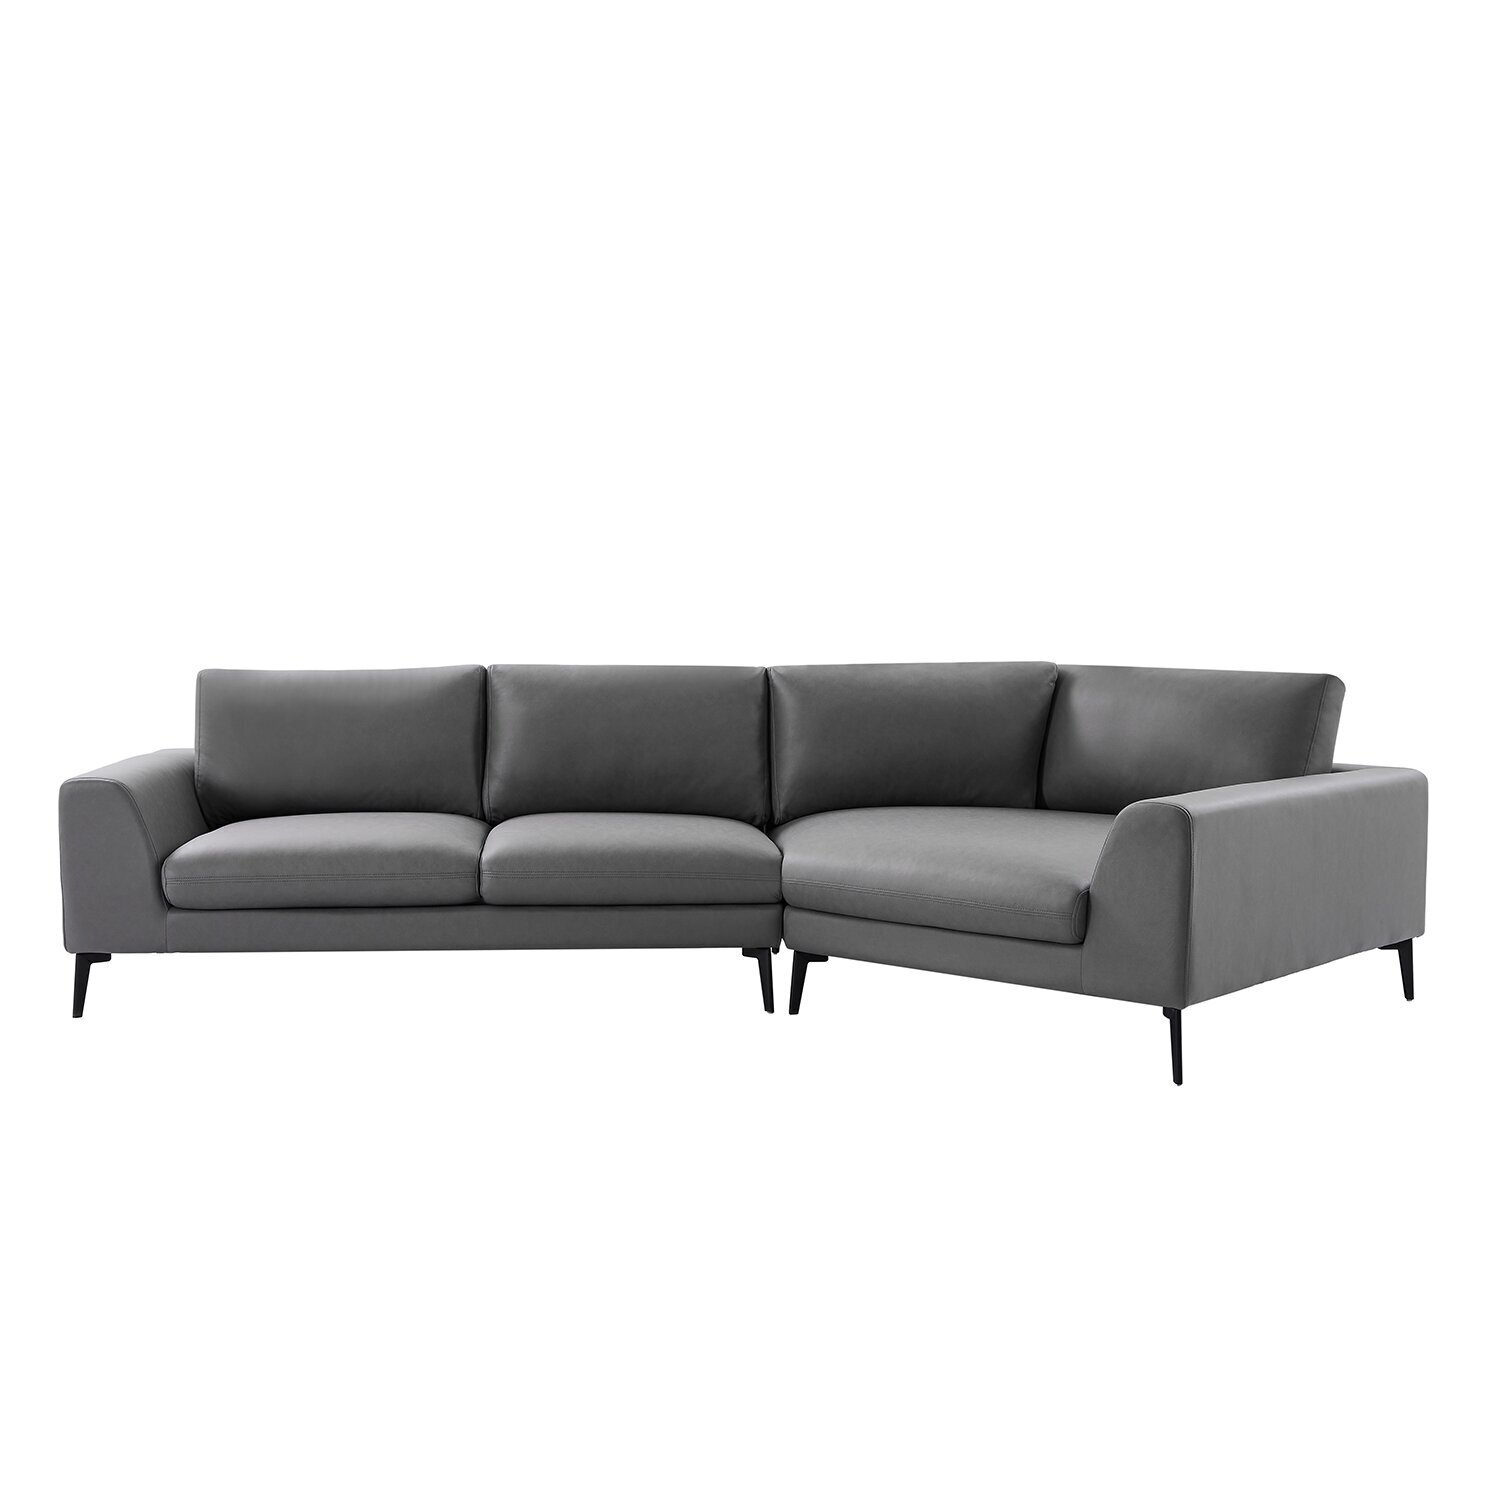 Sophisticated Curved Leather Sofa